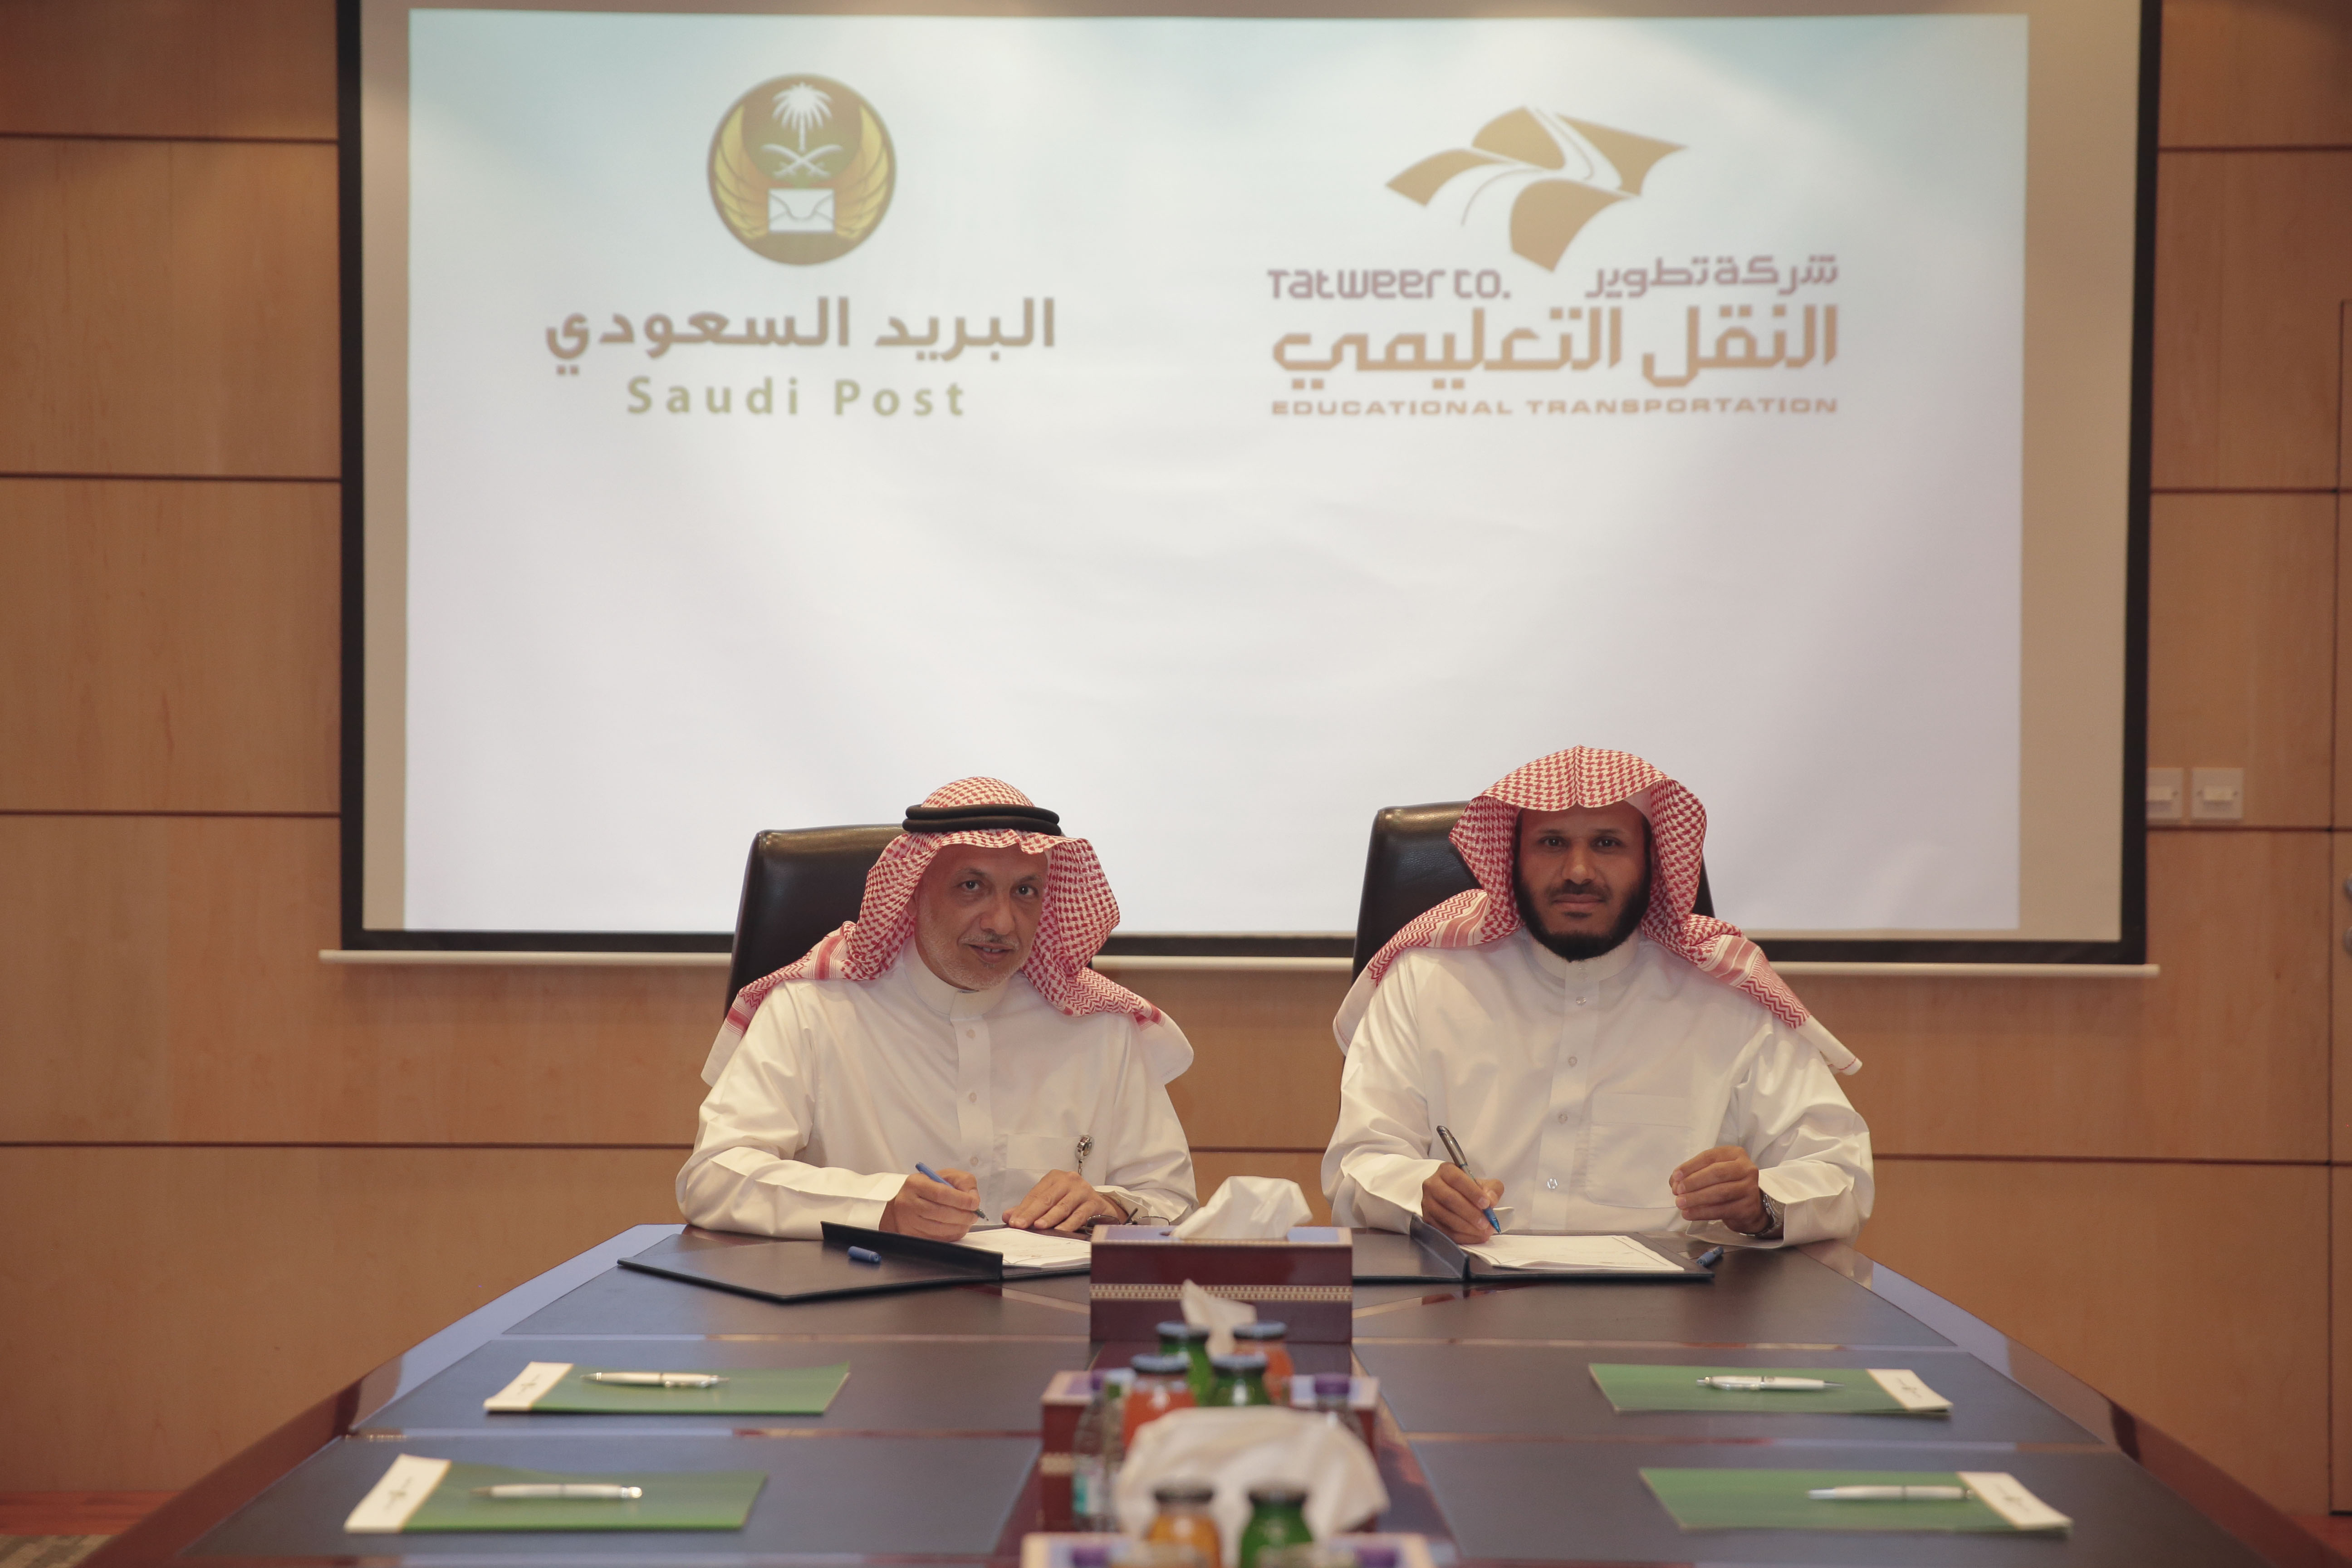 Saudi Post Signed an Agreement with Tatweer Educational Transportation Services Company (TTC)